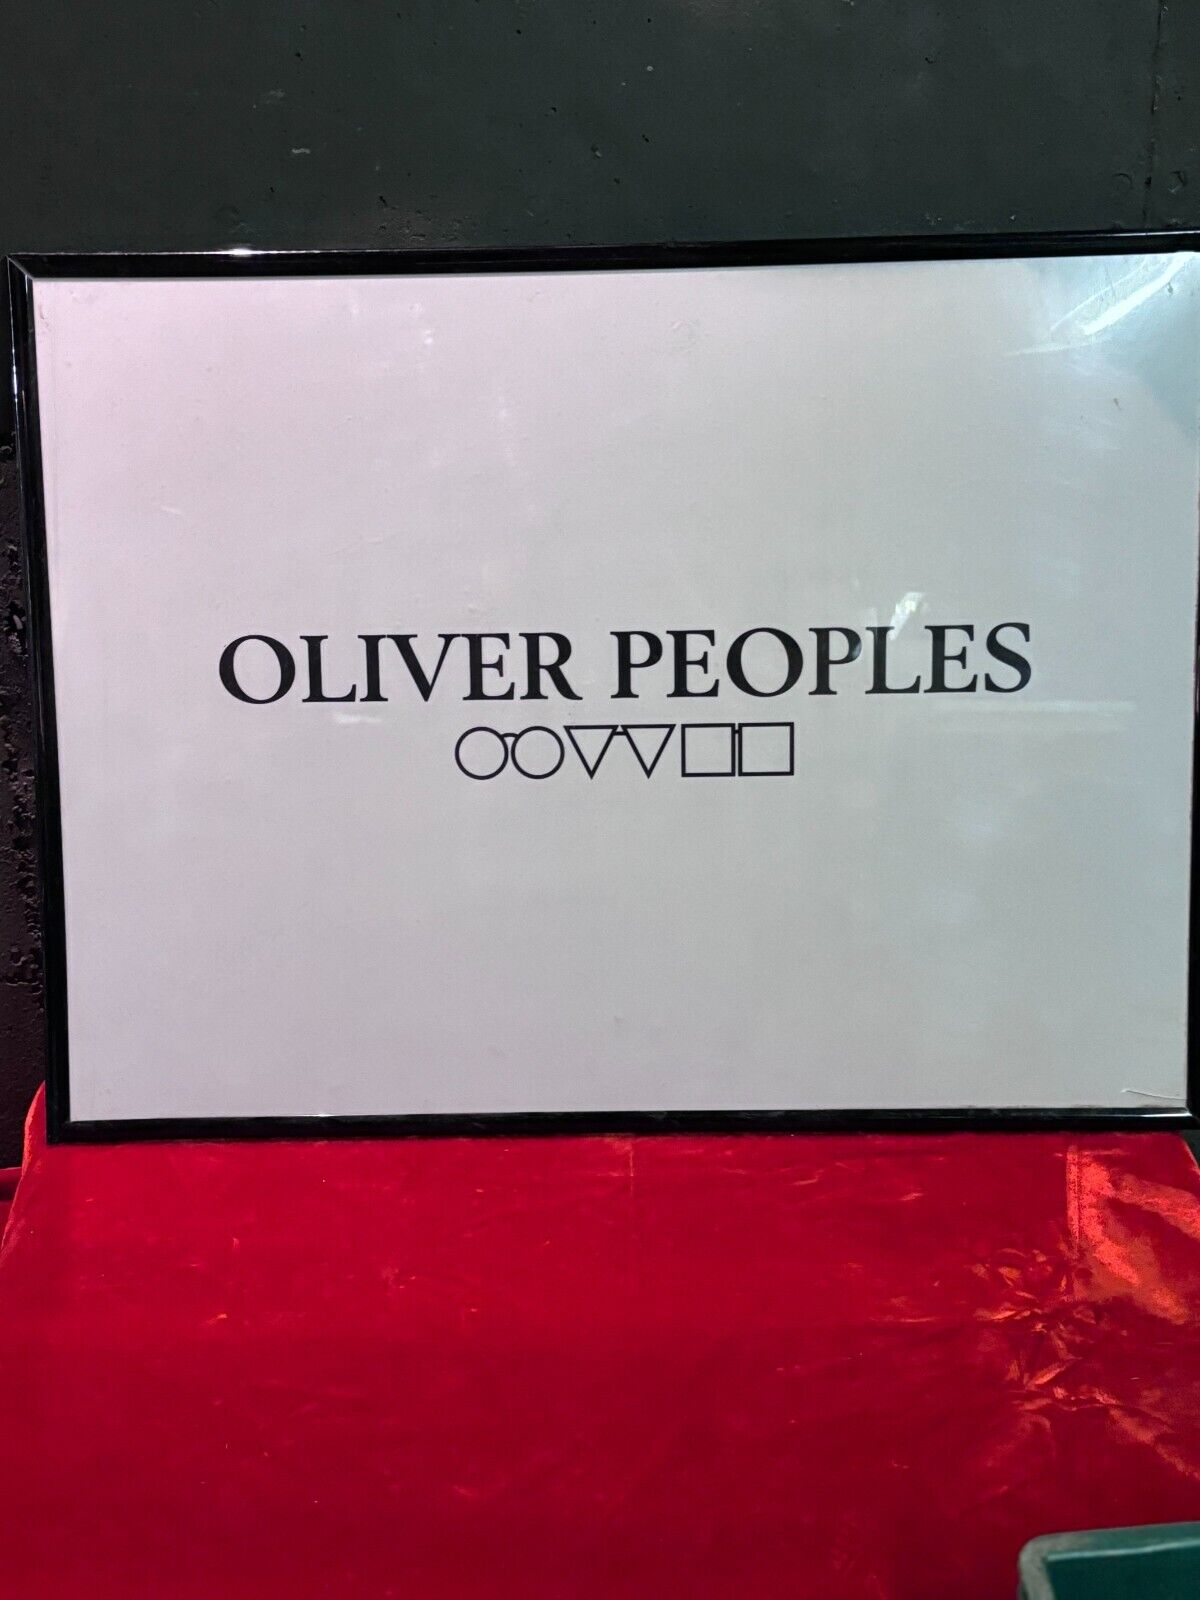 NEW OLIVER PEOPLE SIGN, POSTER, DISPLAY.  COLOR GRAY, SIZE LARGE, 1 LB 6 OZ